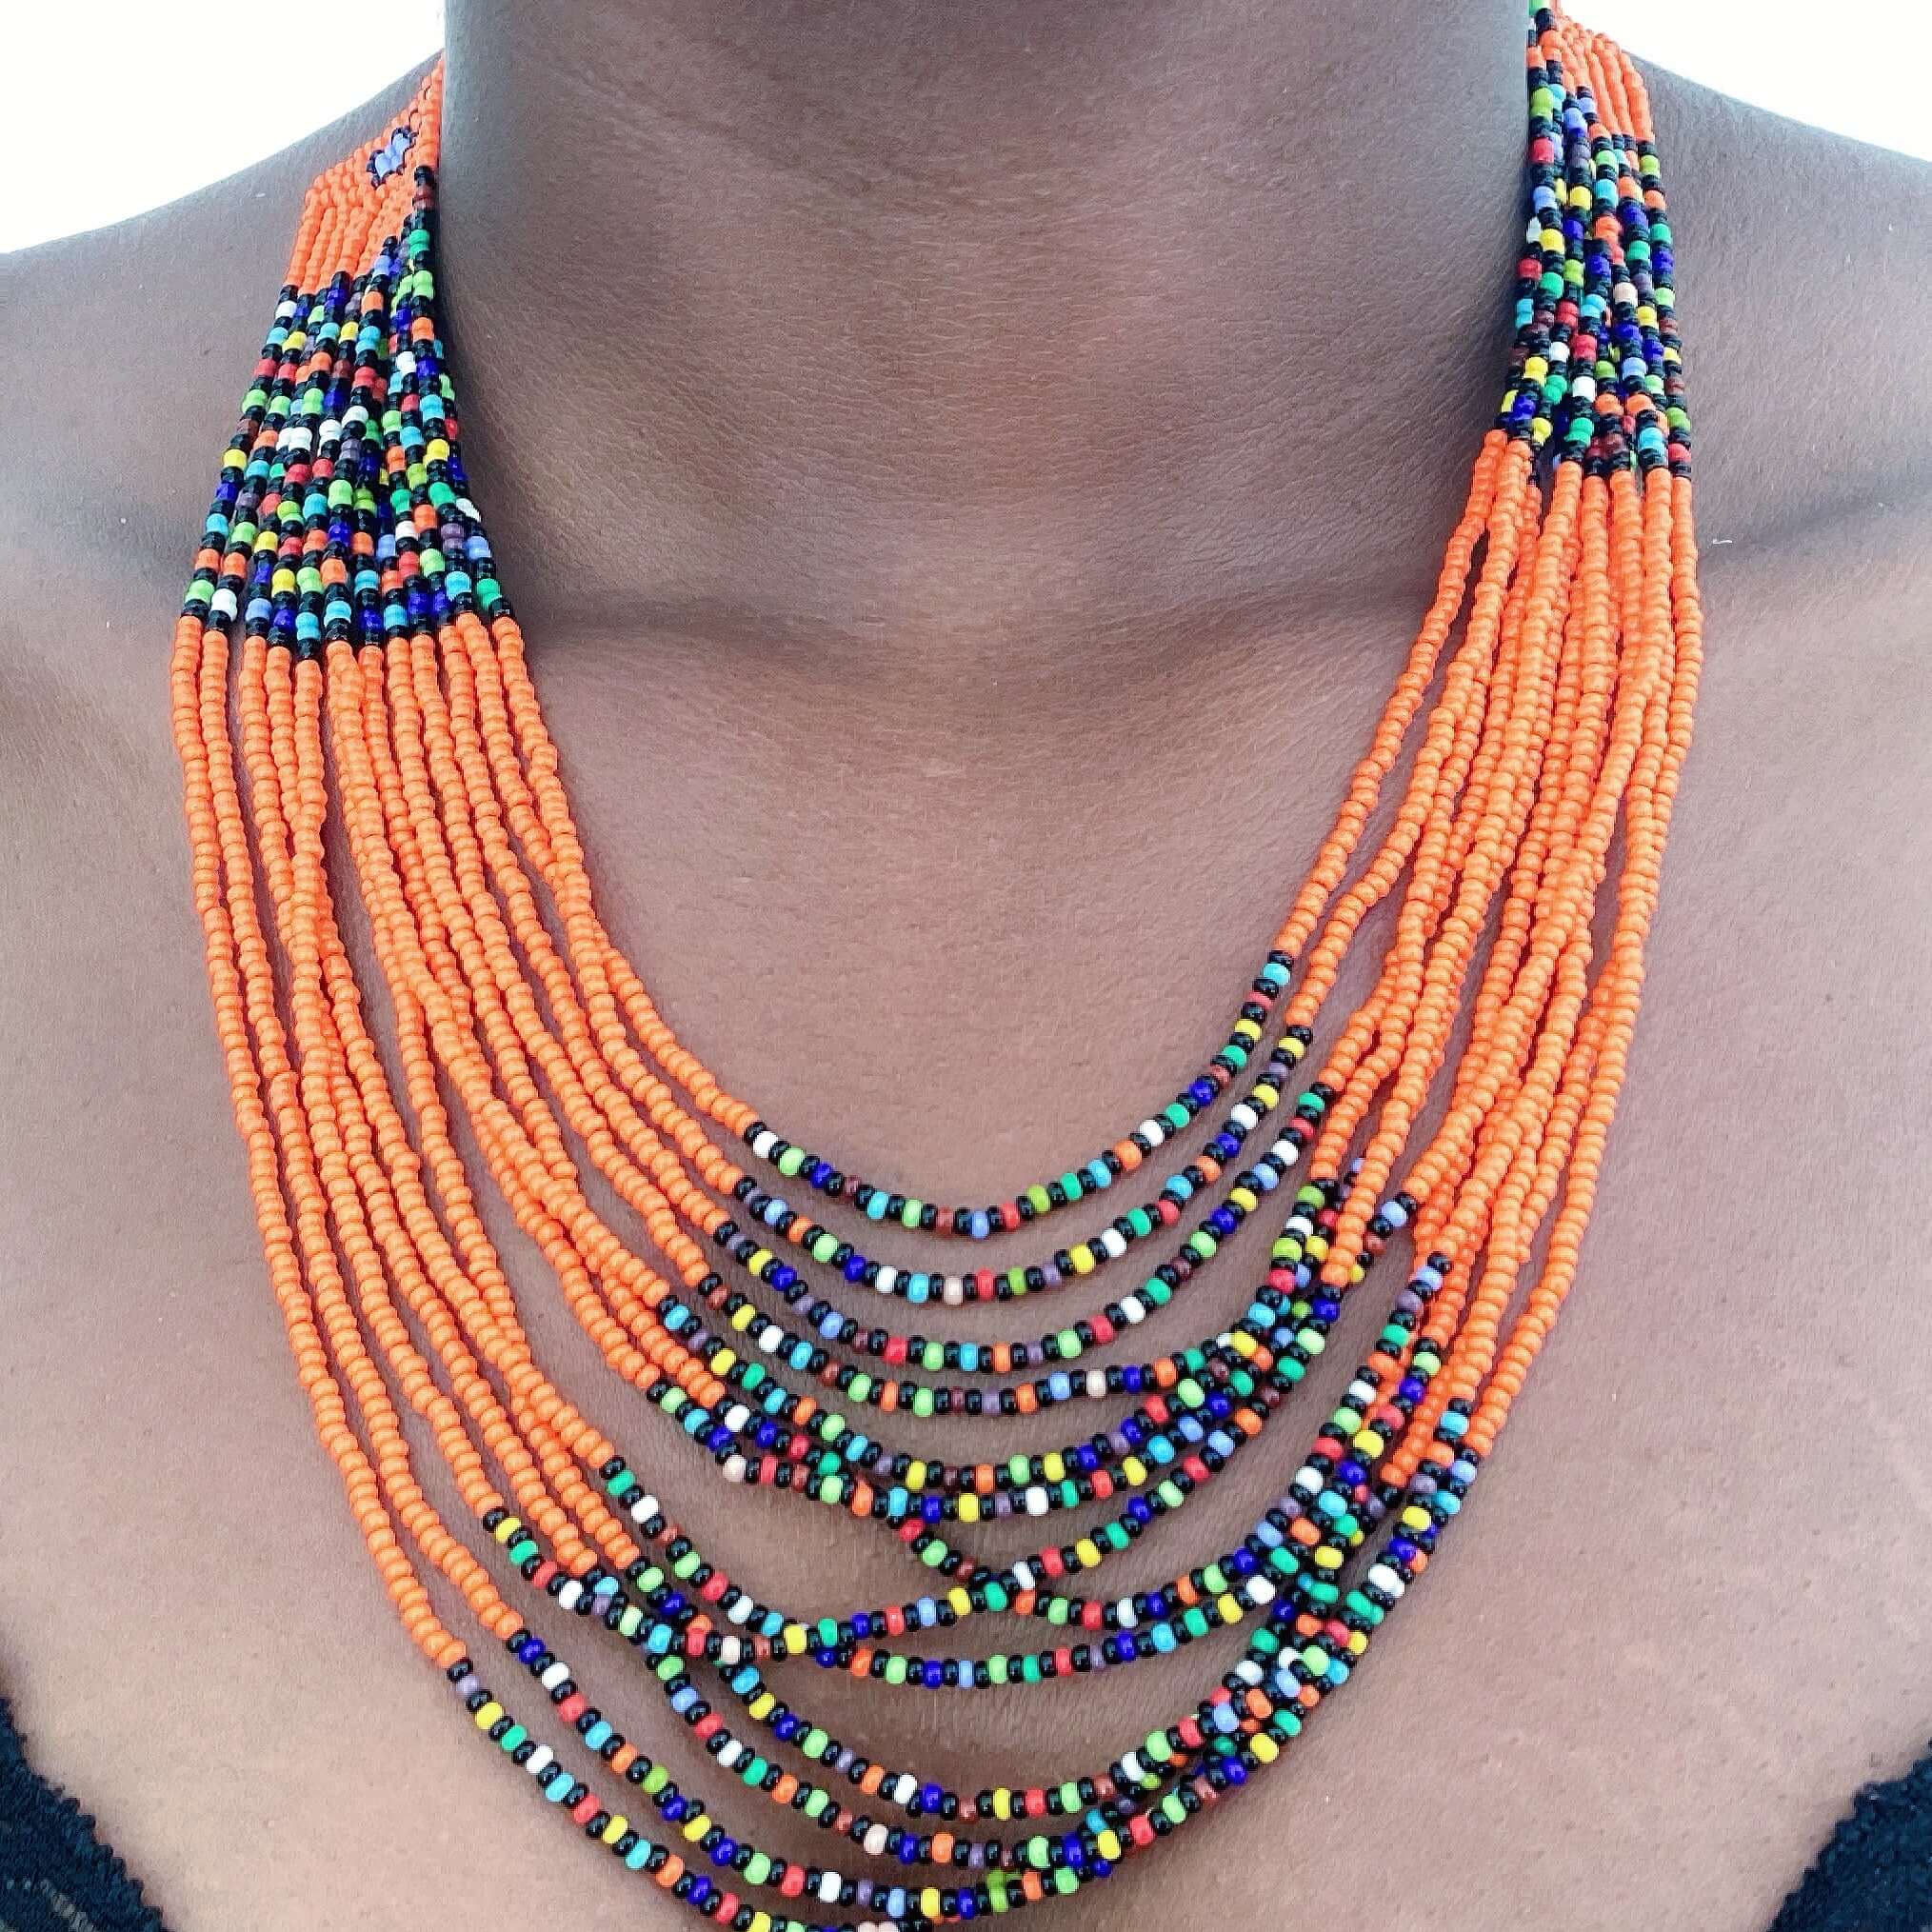 Detail view of thirteen strand zulu beaded necklace in bands of orange and multi mix colors alternating.